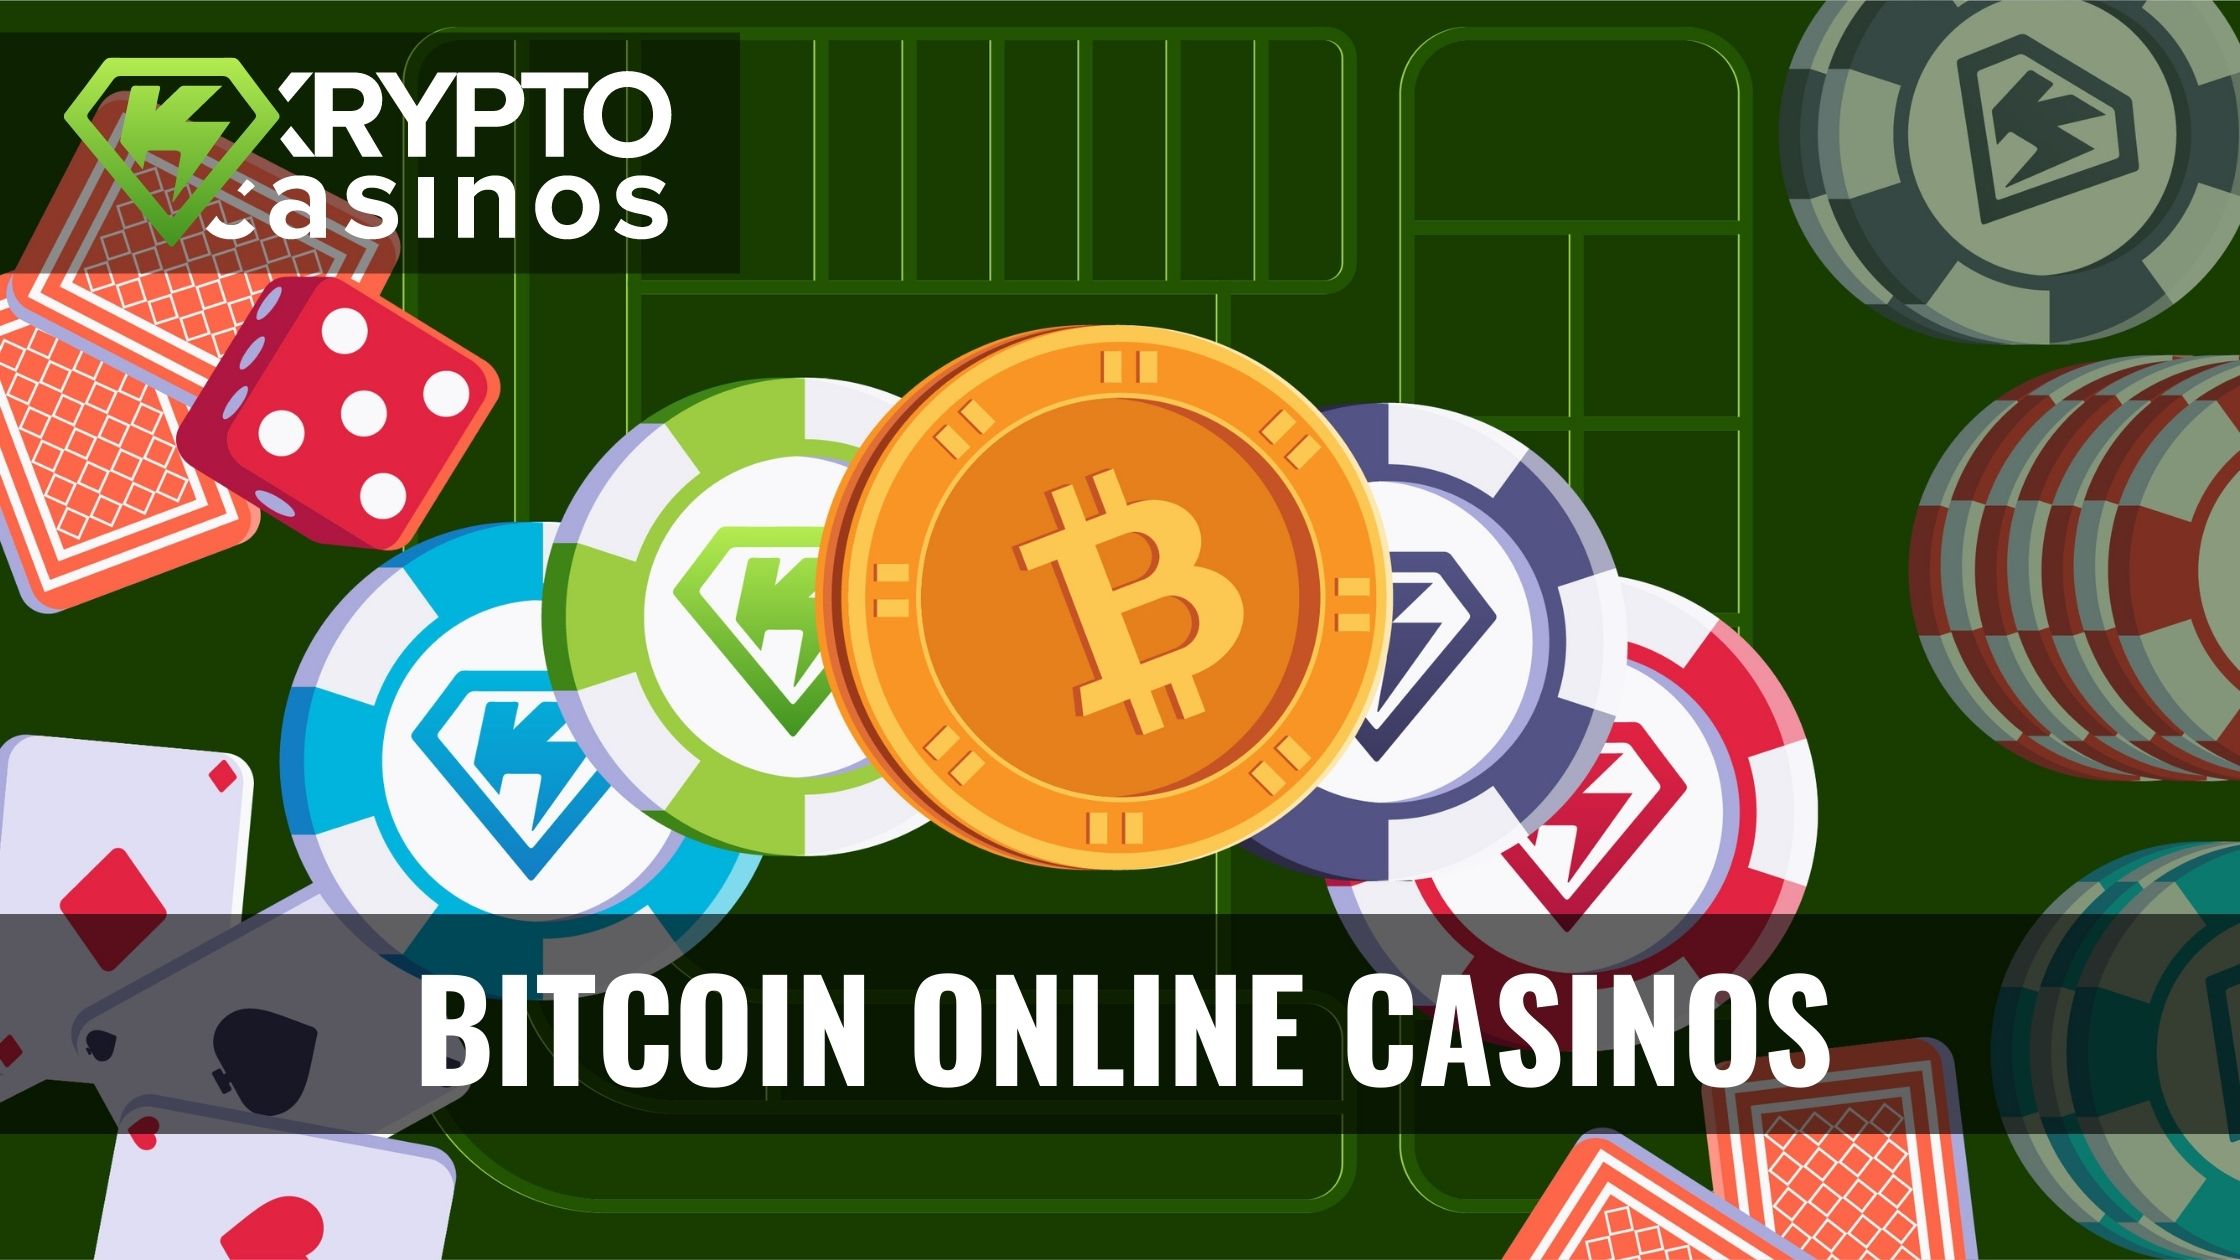 Picture Your bitcoin casinos On Top. Read This And Make It So